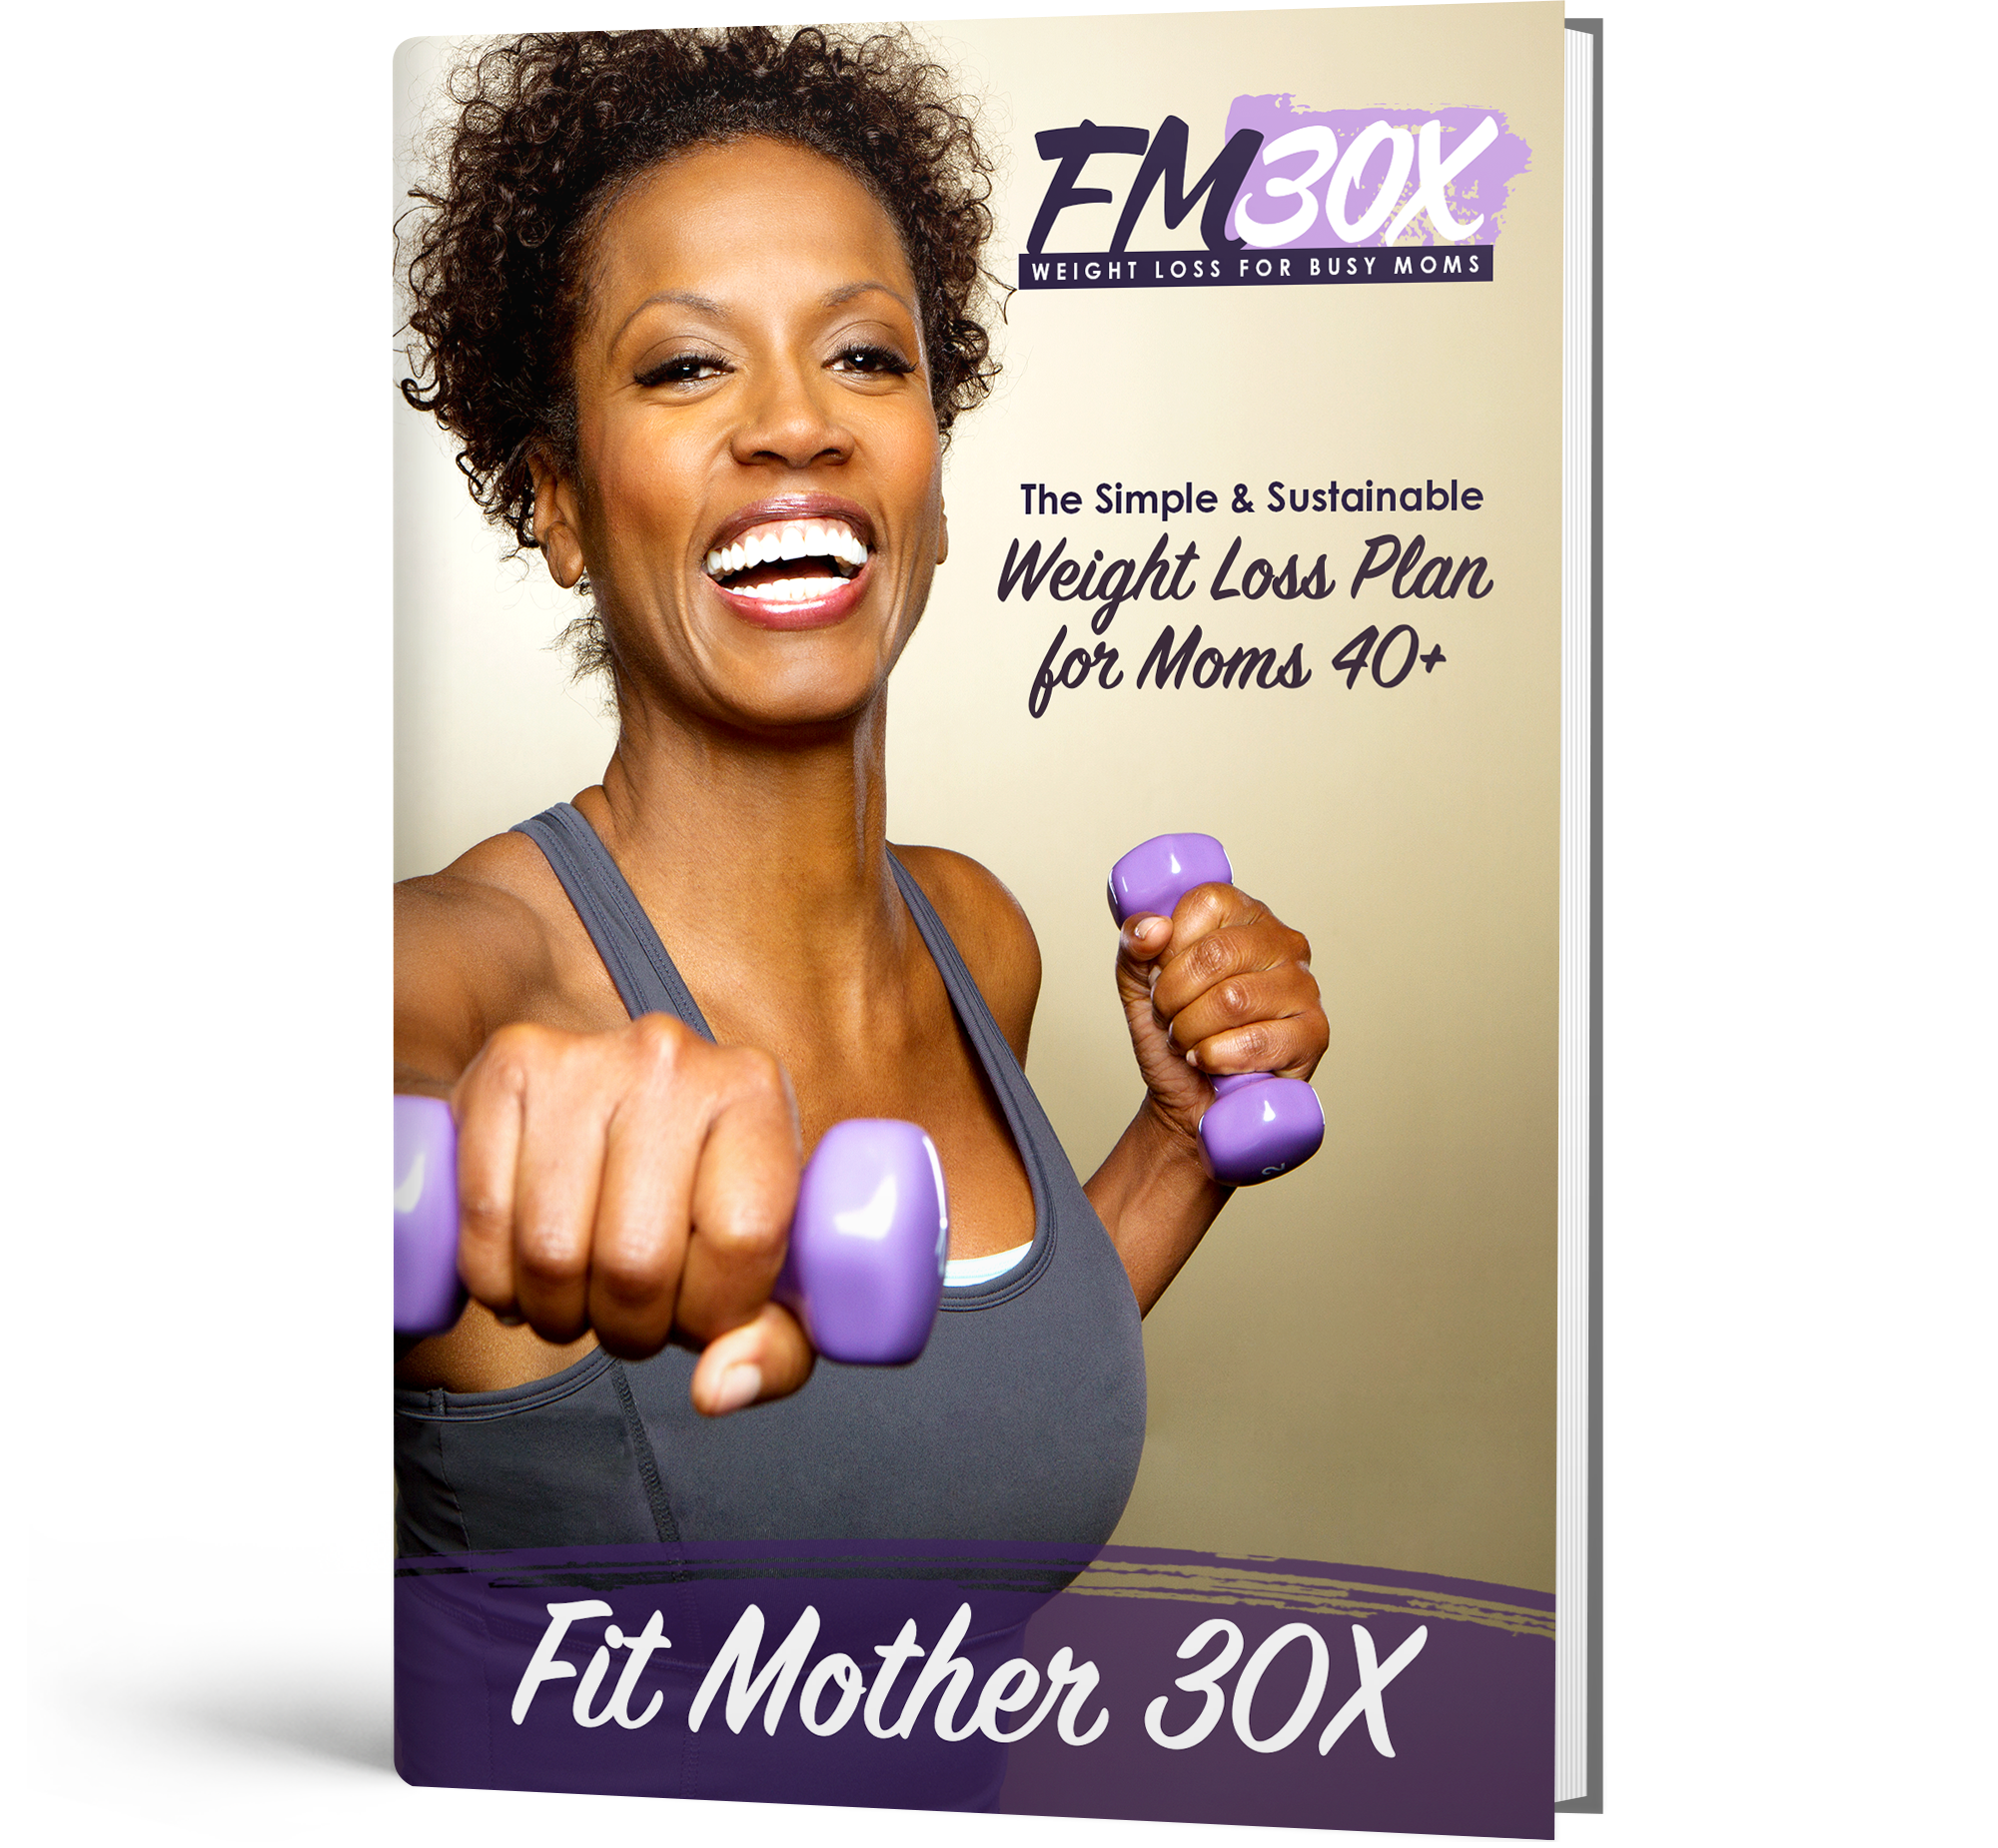 Fit Mother 30X (FM30X) Save $50